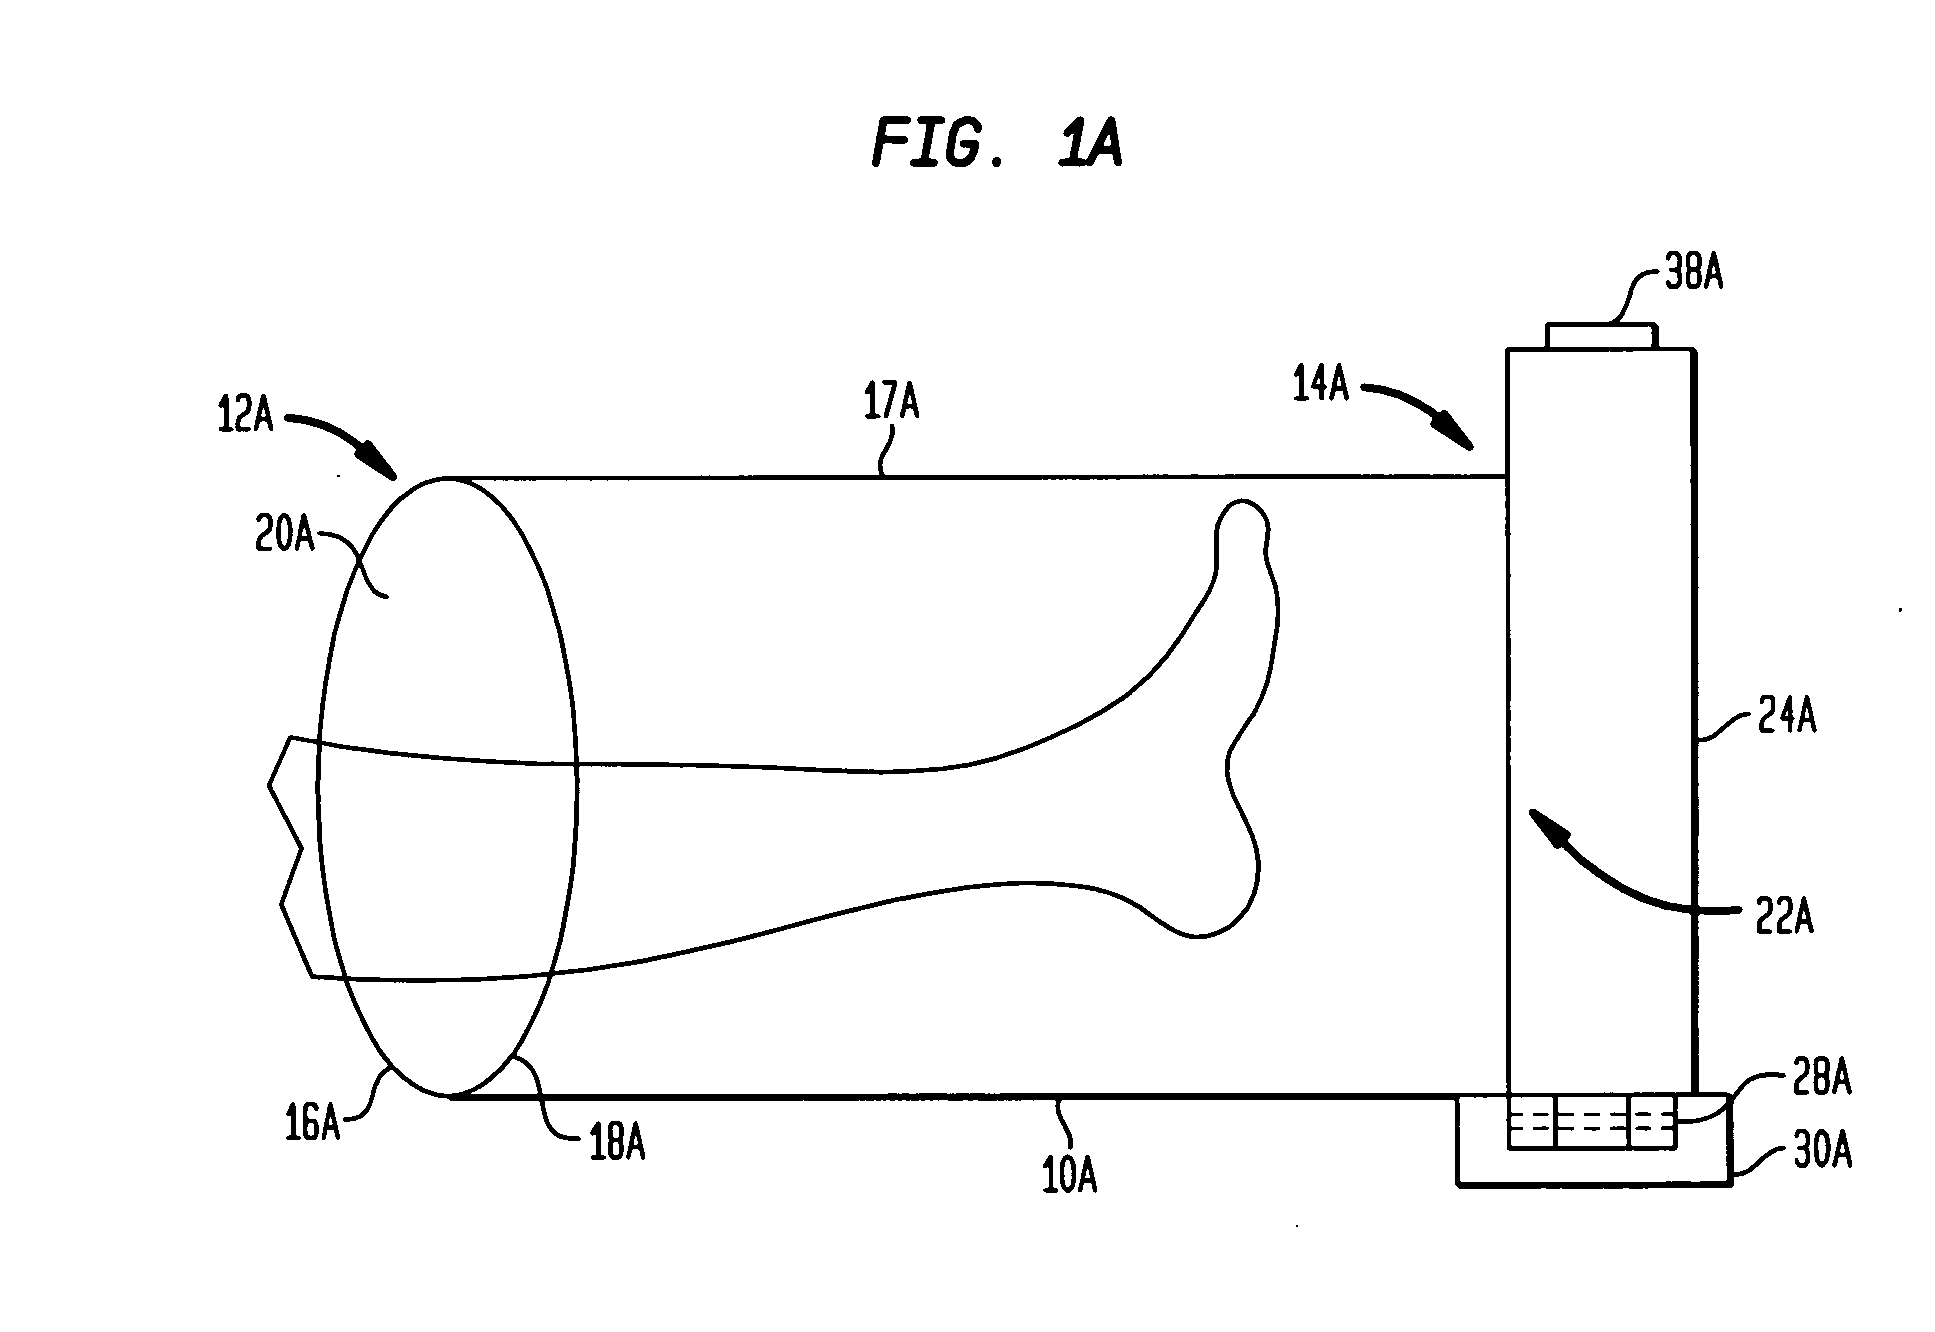 Access port for flexible wound treatment devices